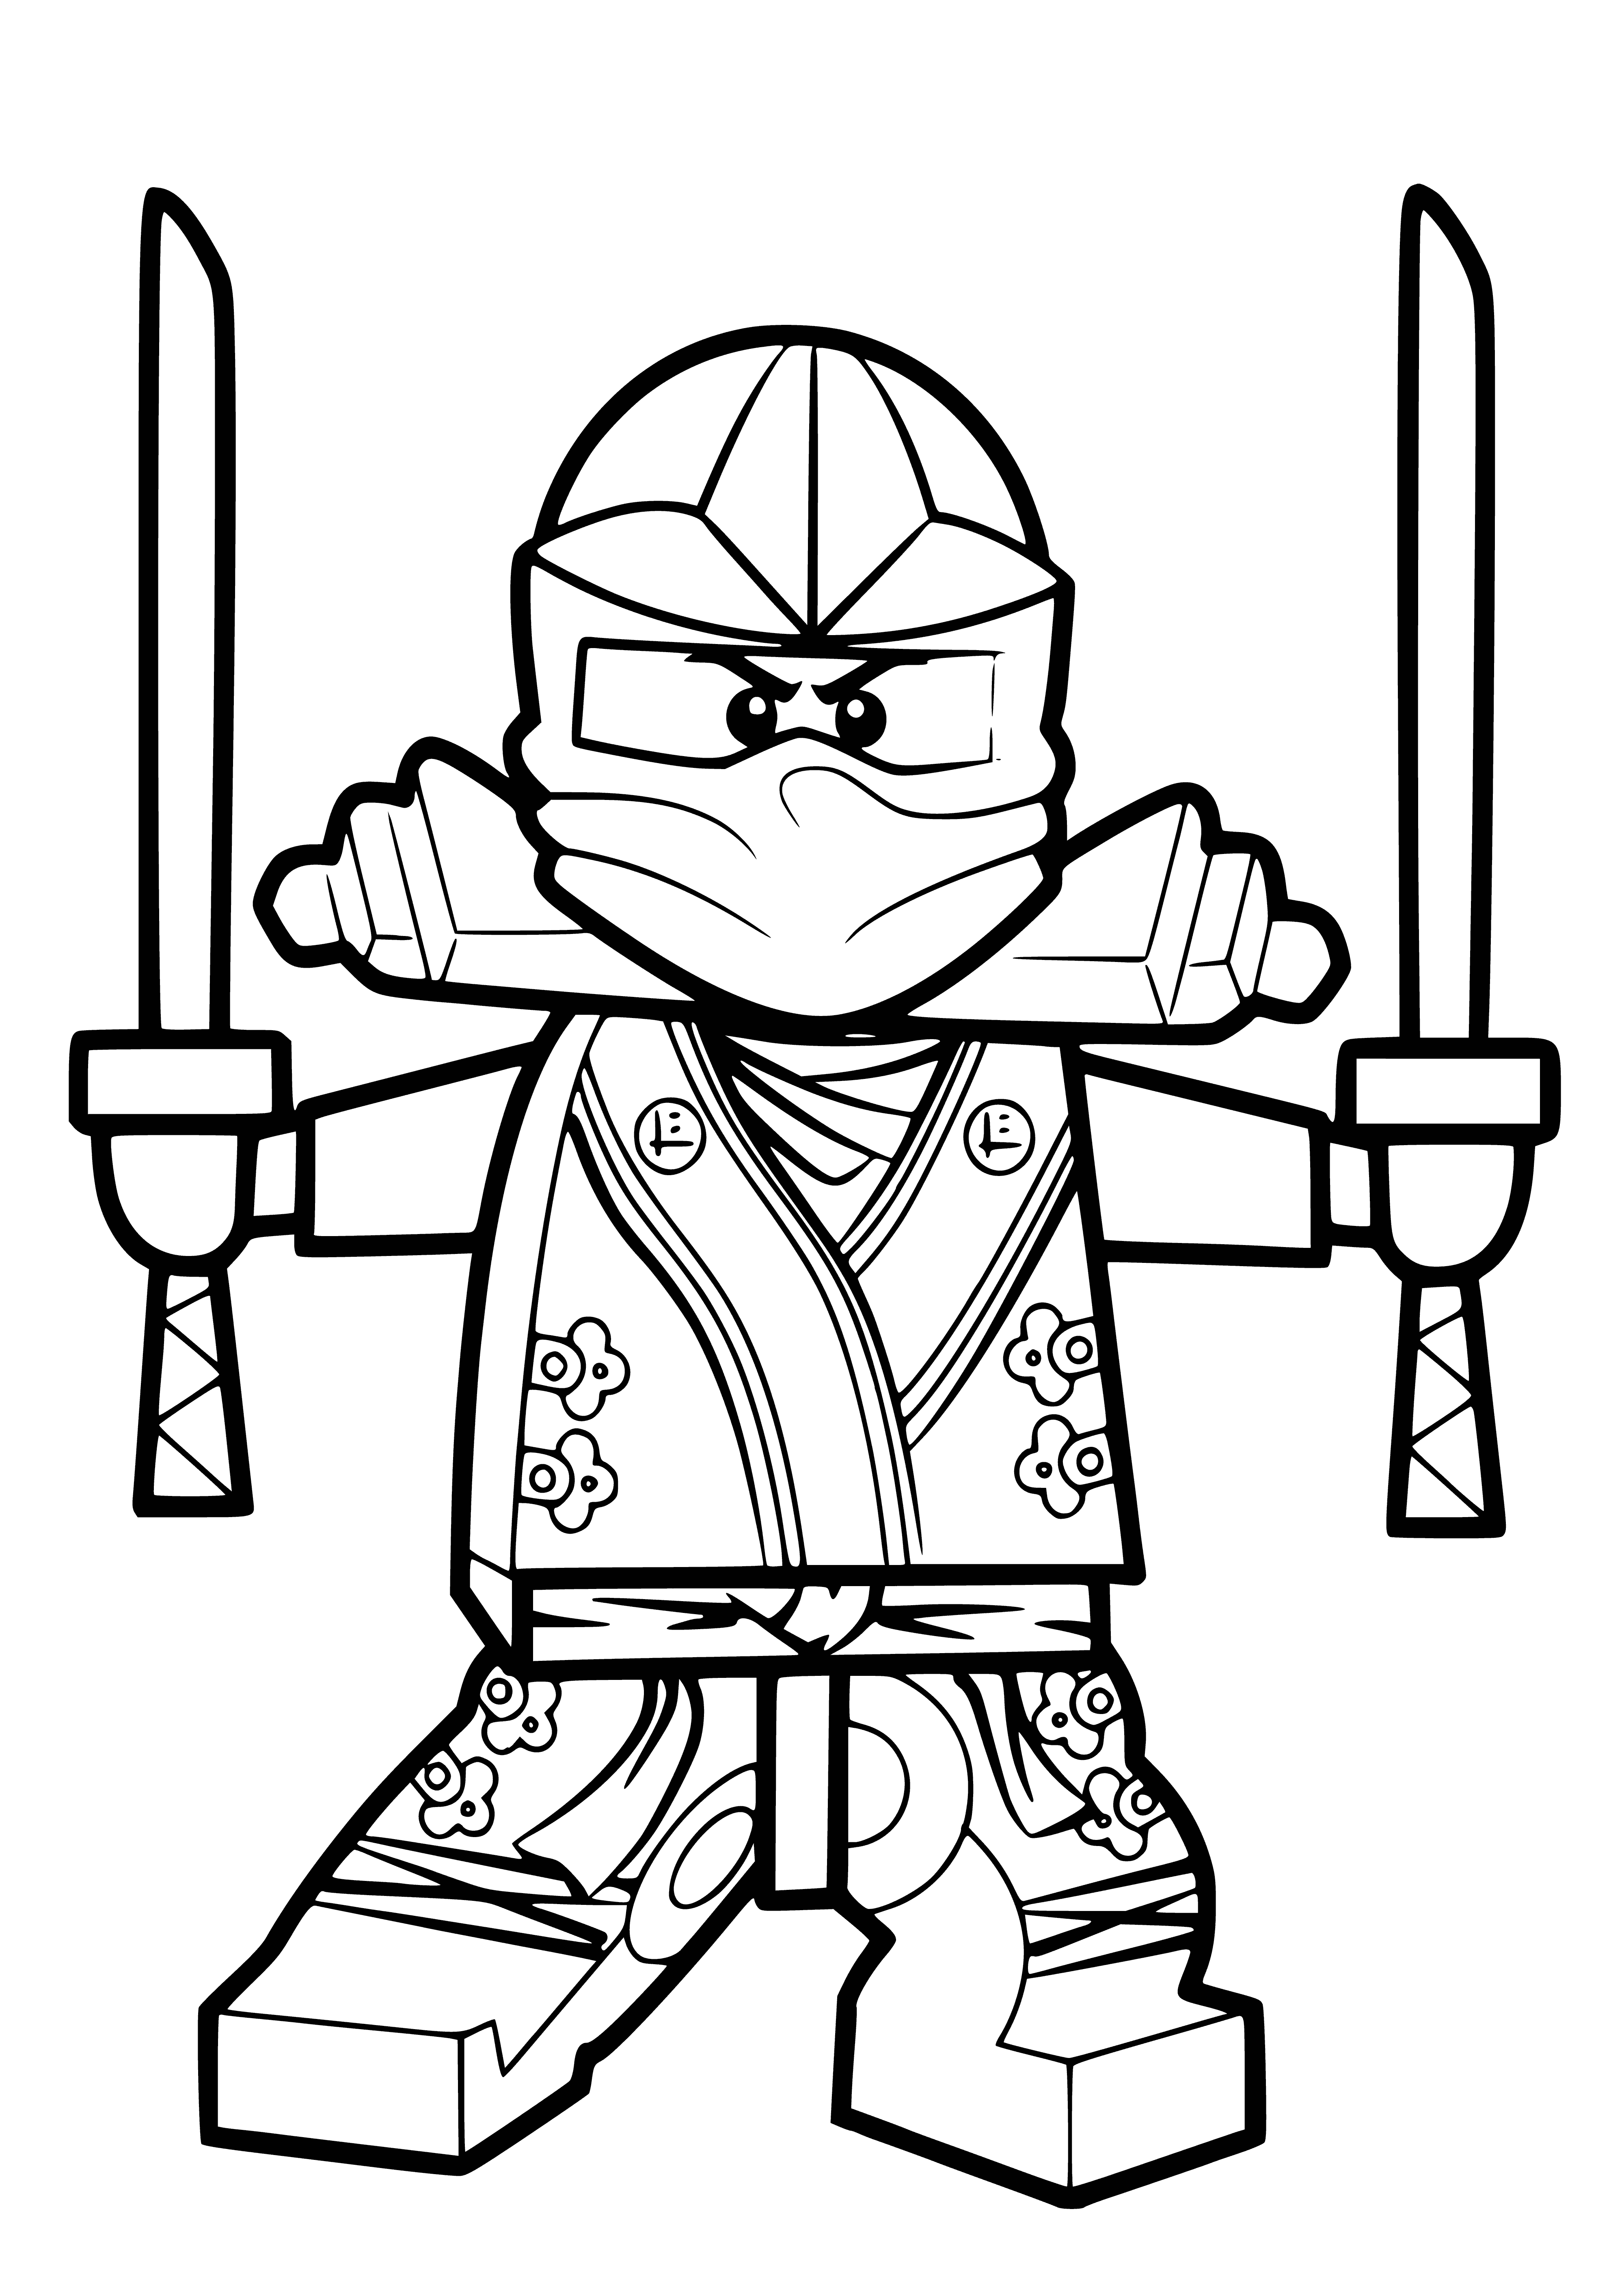 coloring page: Six Lego ninjas with swords fight in traditional ninja poses on the coloring page. Two fly through the air while the rest stand on the ground ready to battle.